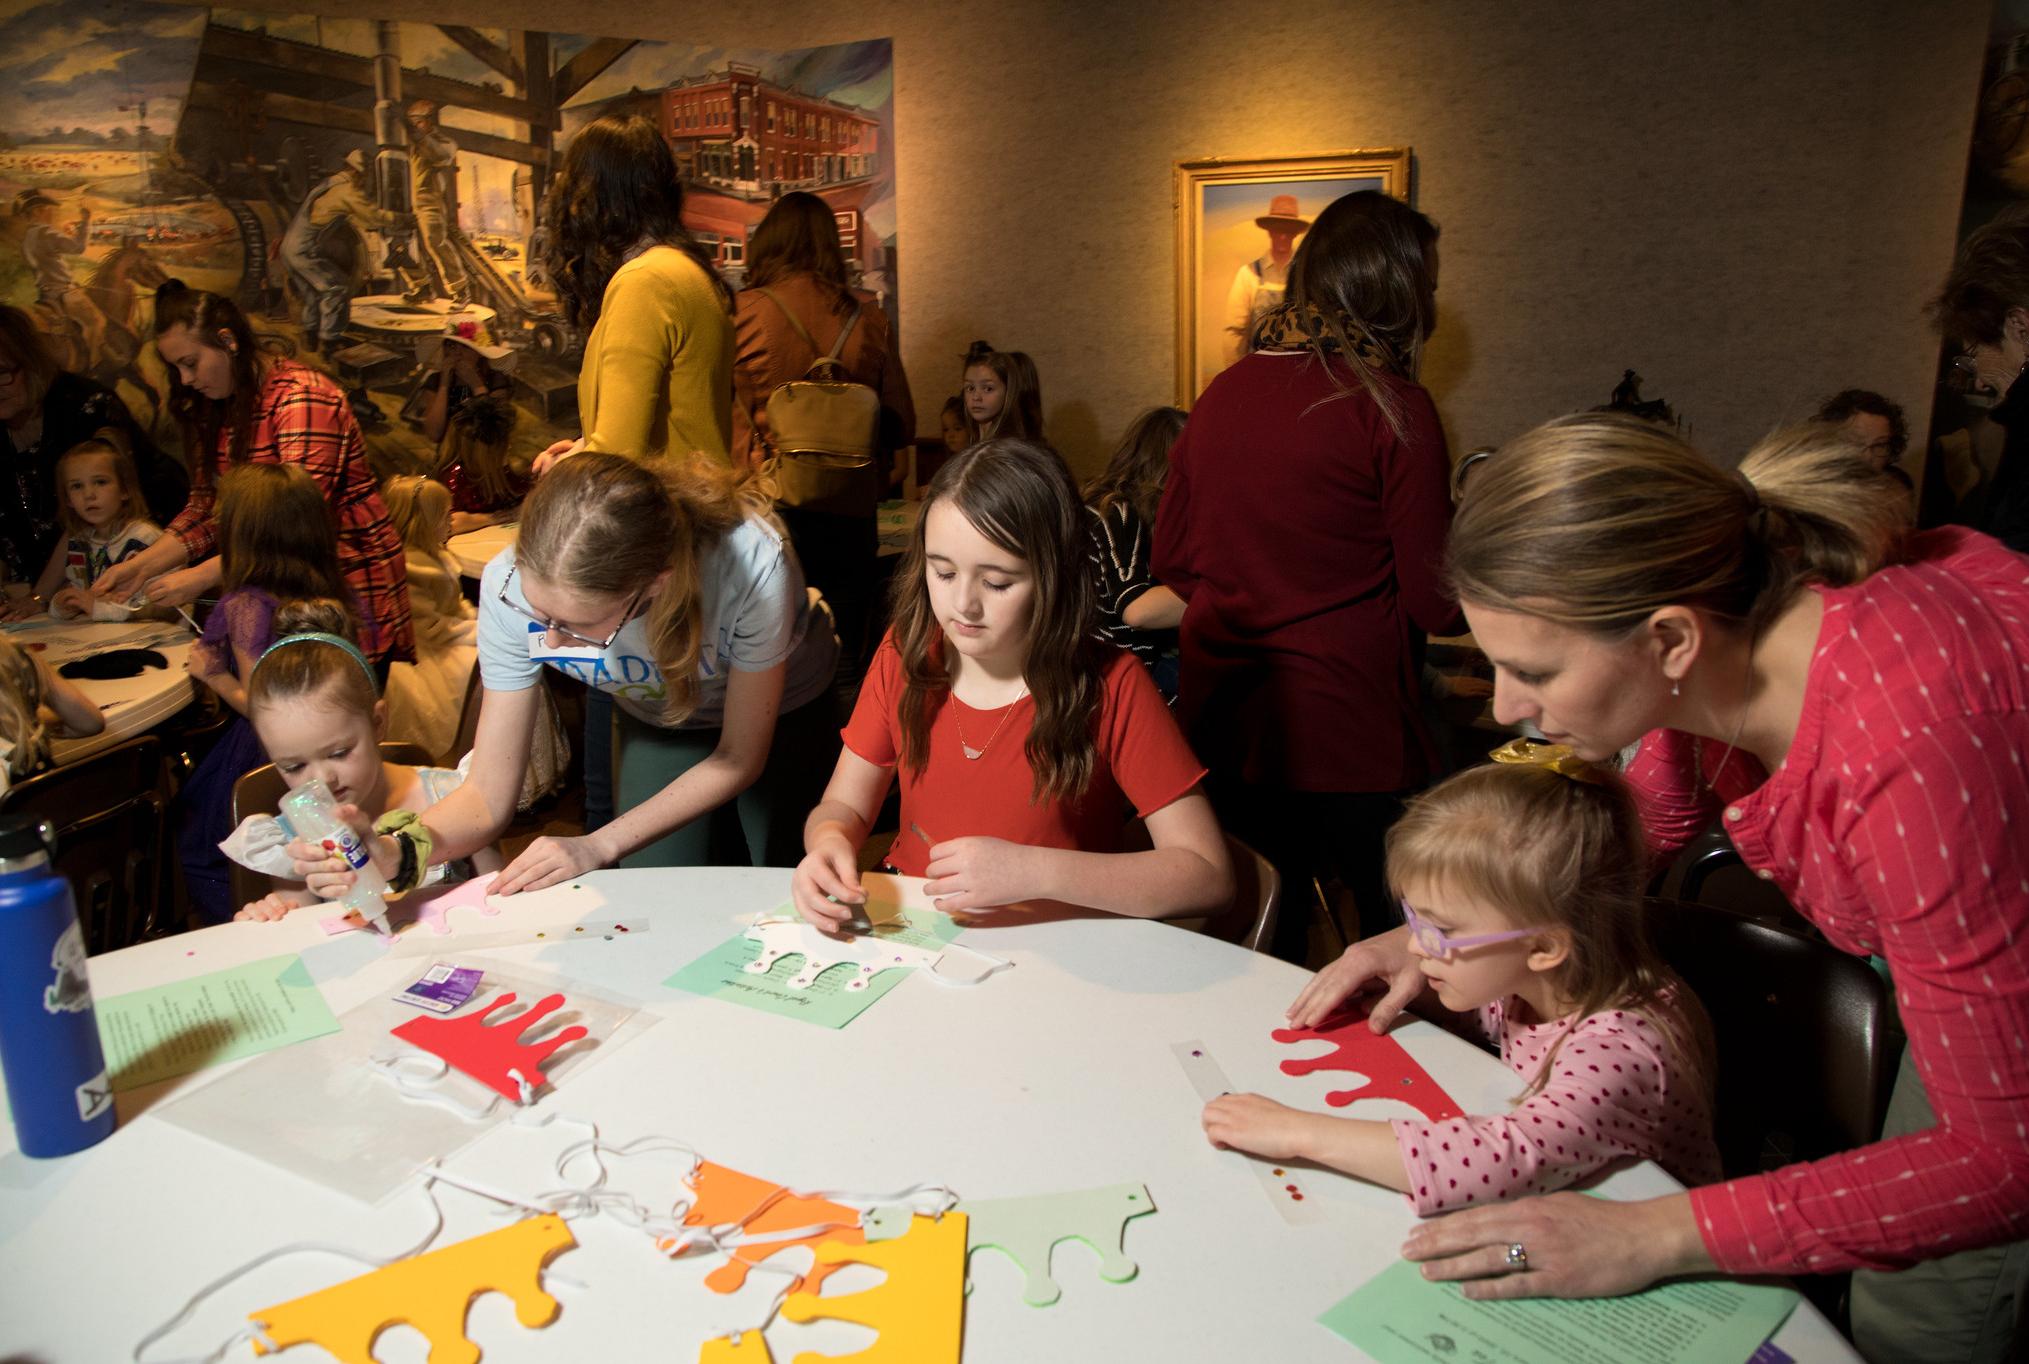 Visitors make crafts in the Shafer Gallery